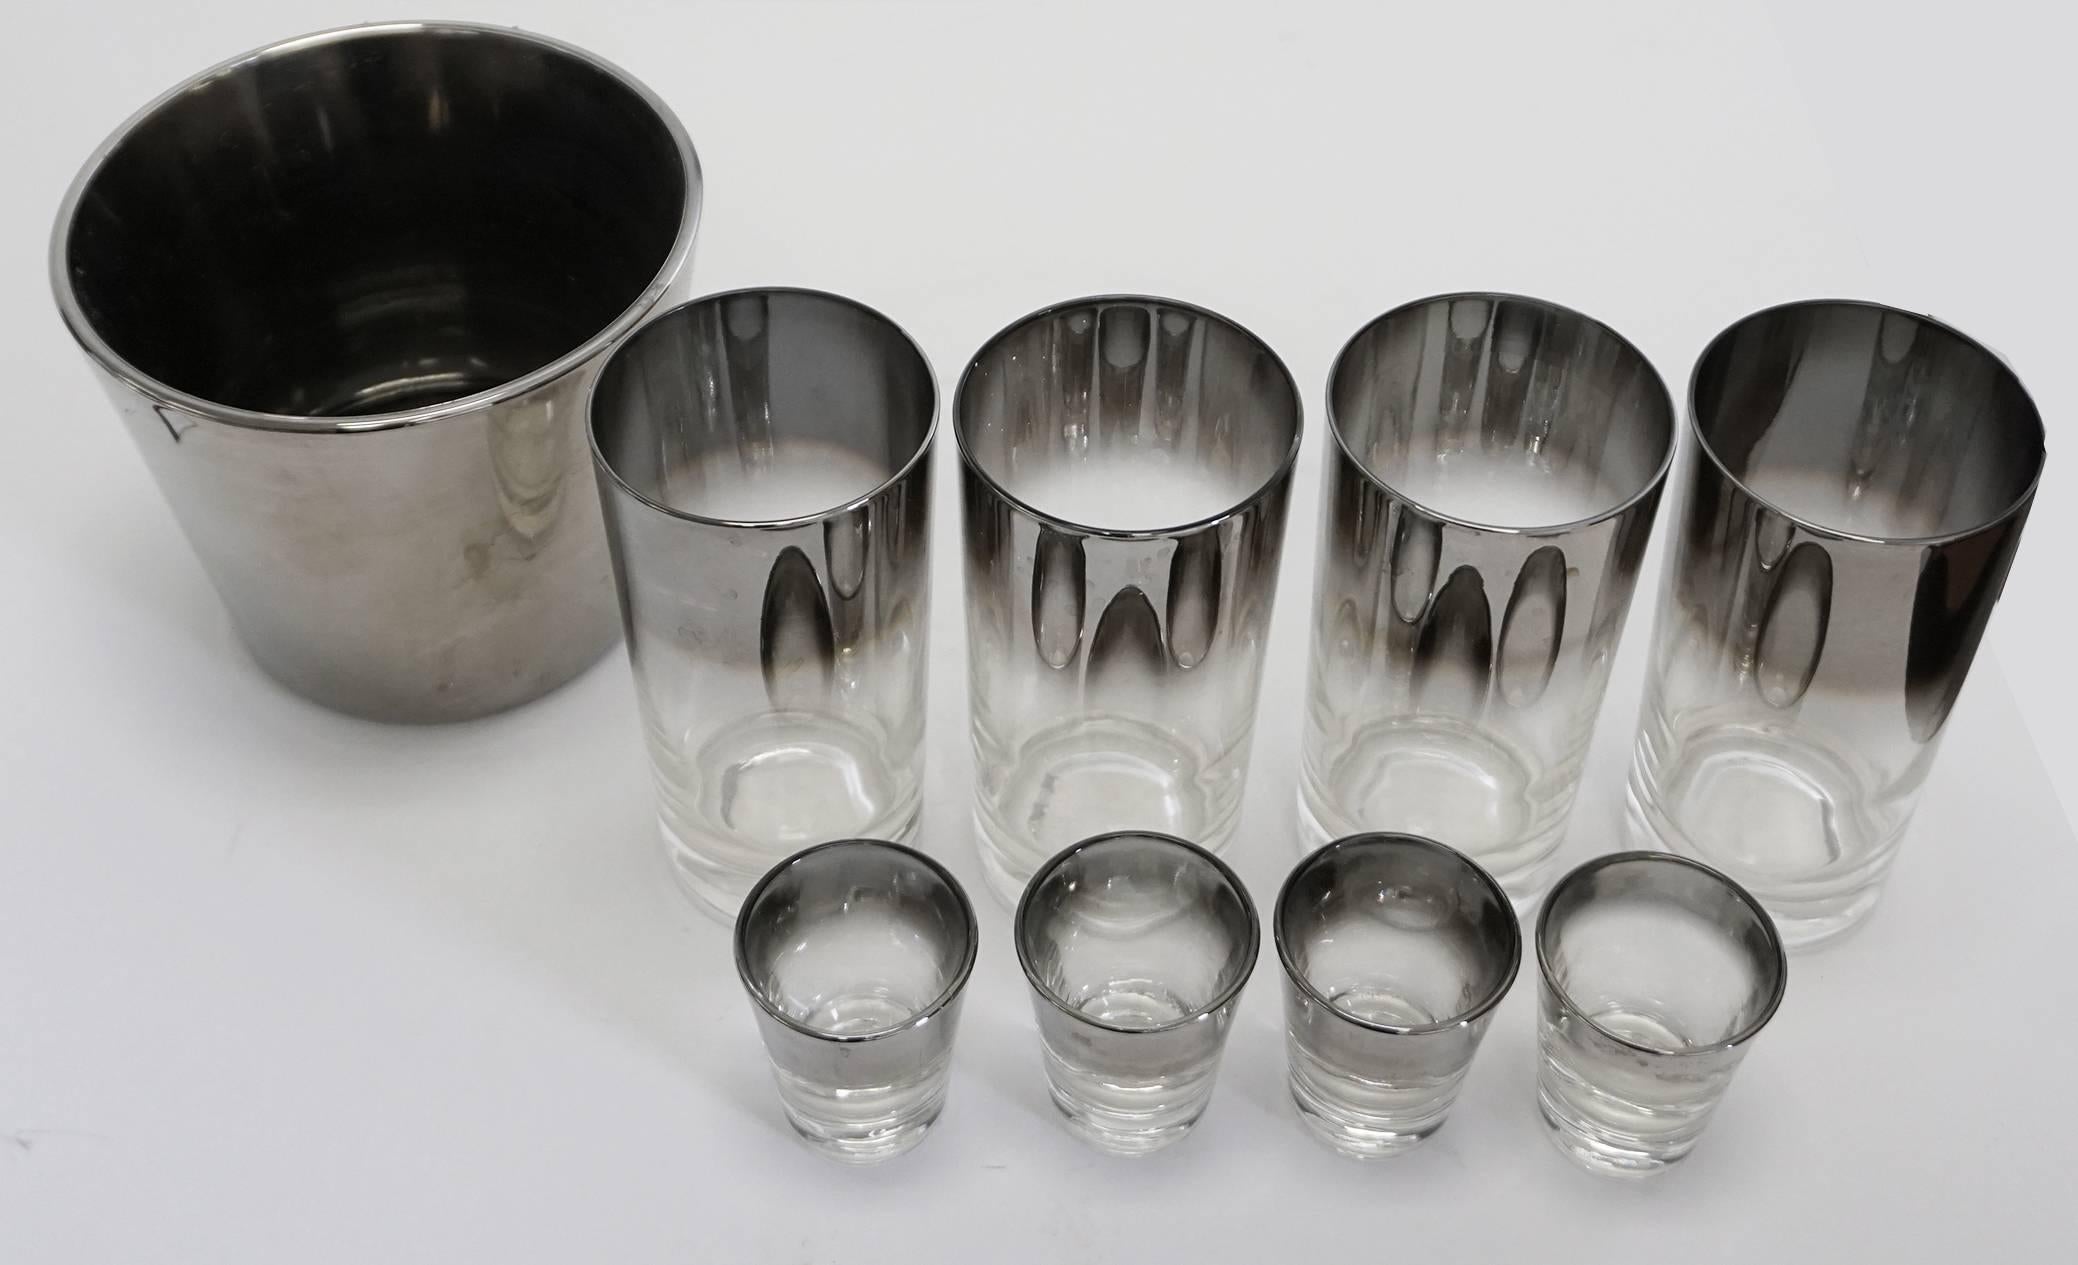 In the manner of Dorothy Thorpe, a set of four silver fade highball tumblers, four shot glasses and ice bucket. Classic bar essentials! Sizes: Highballs: 2 3/4" W x 2 1/4" D x 5 1/2 T. Shot glasses: 2" W x 1 3/8" D x 2 3/8 T. Ice